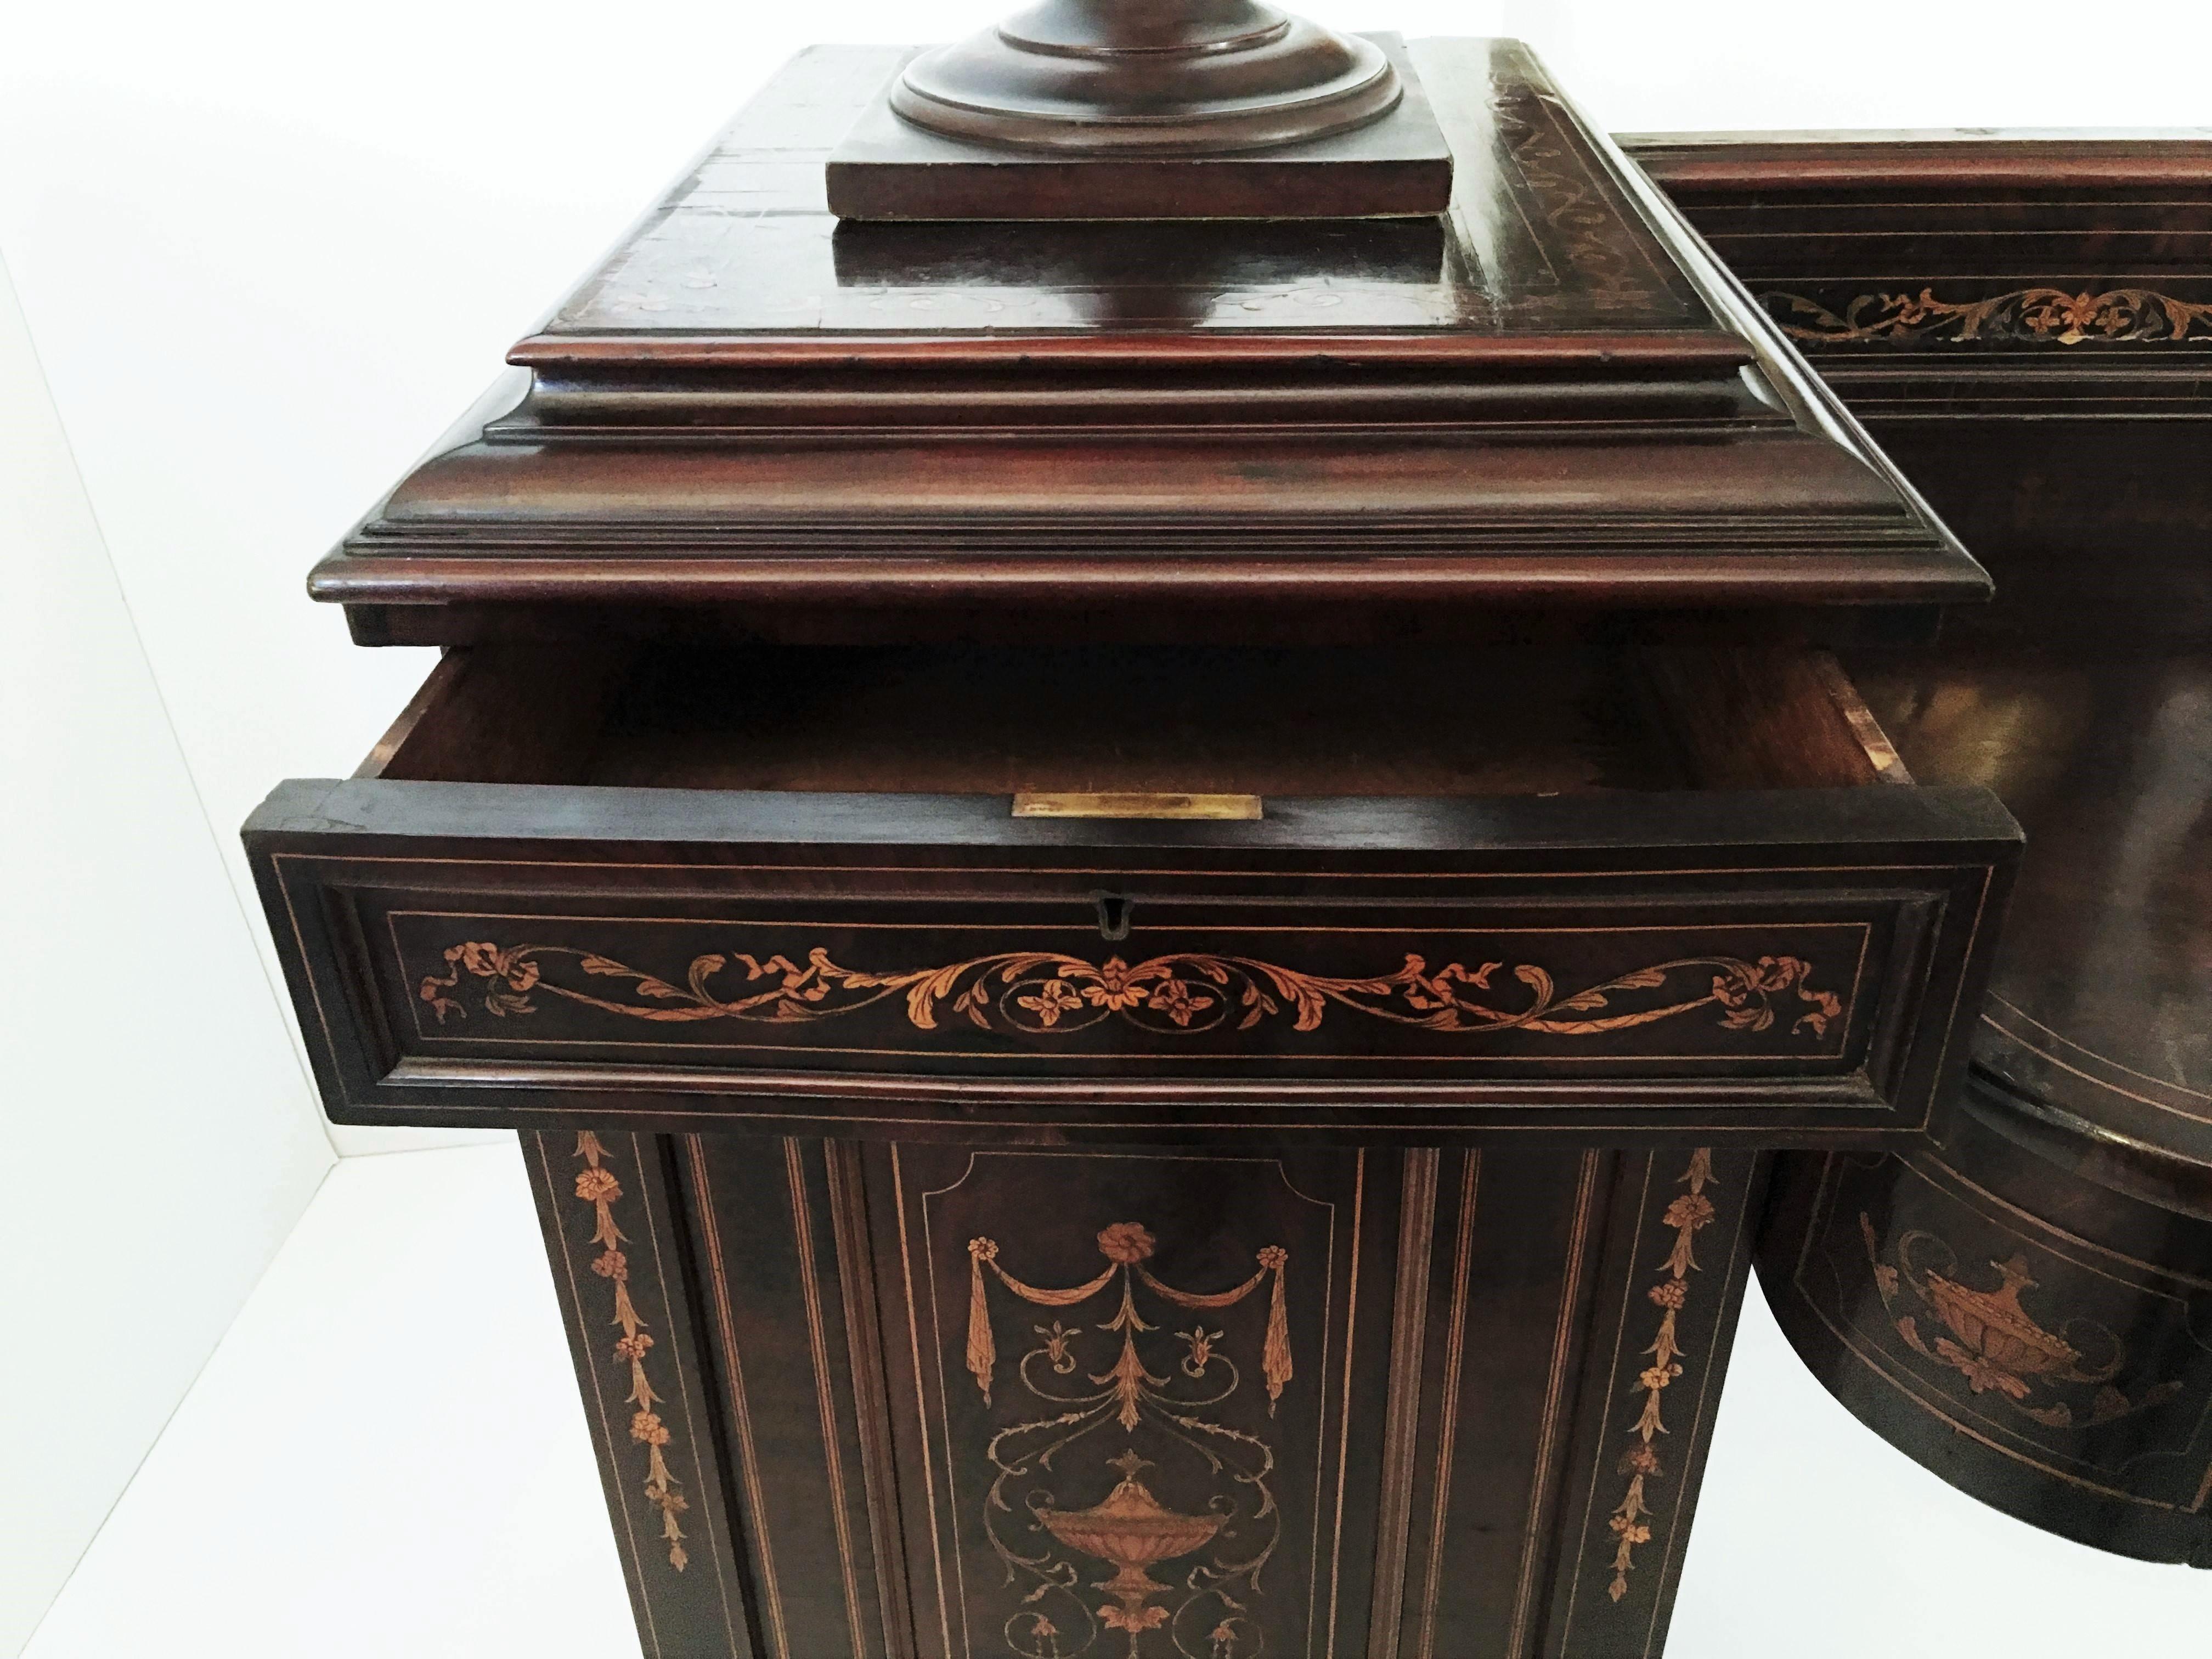 19th Century Regency Marquetry Inlaid Rosewood Sideboard with Cutlery Urns For Sale 1